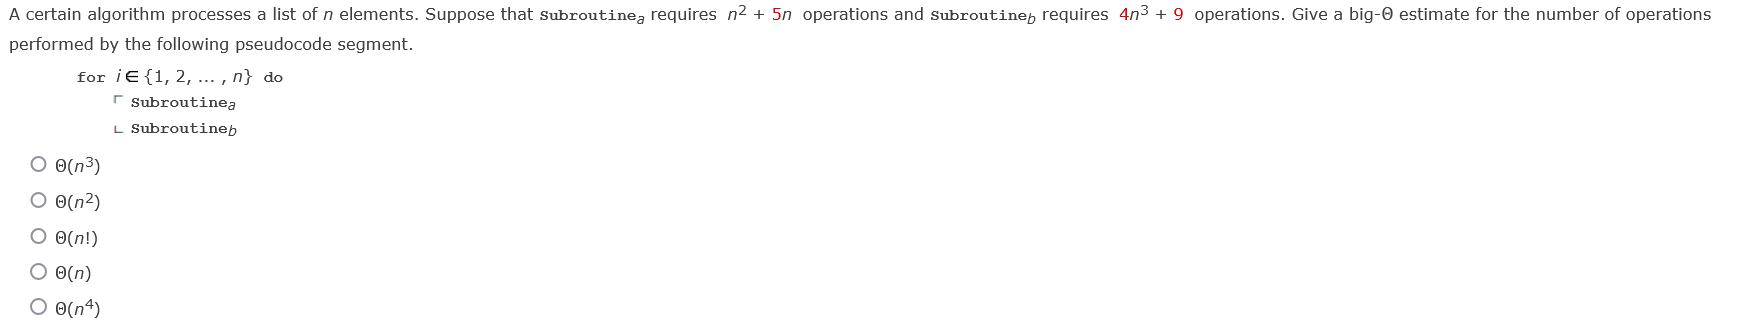 A certain algorithm processes a list of n elements. Suppose that subroutinea requires n + 5n operations and